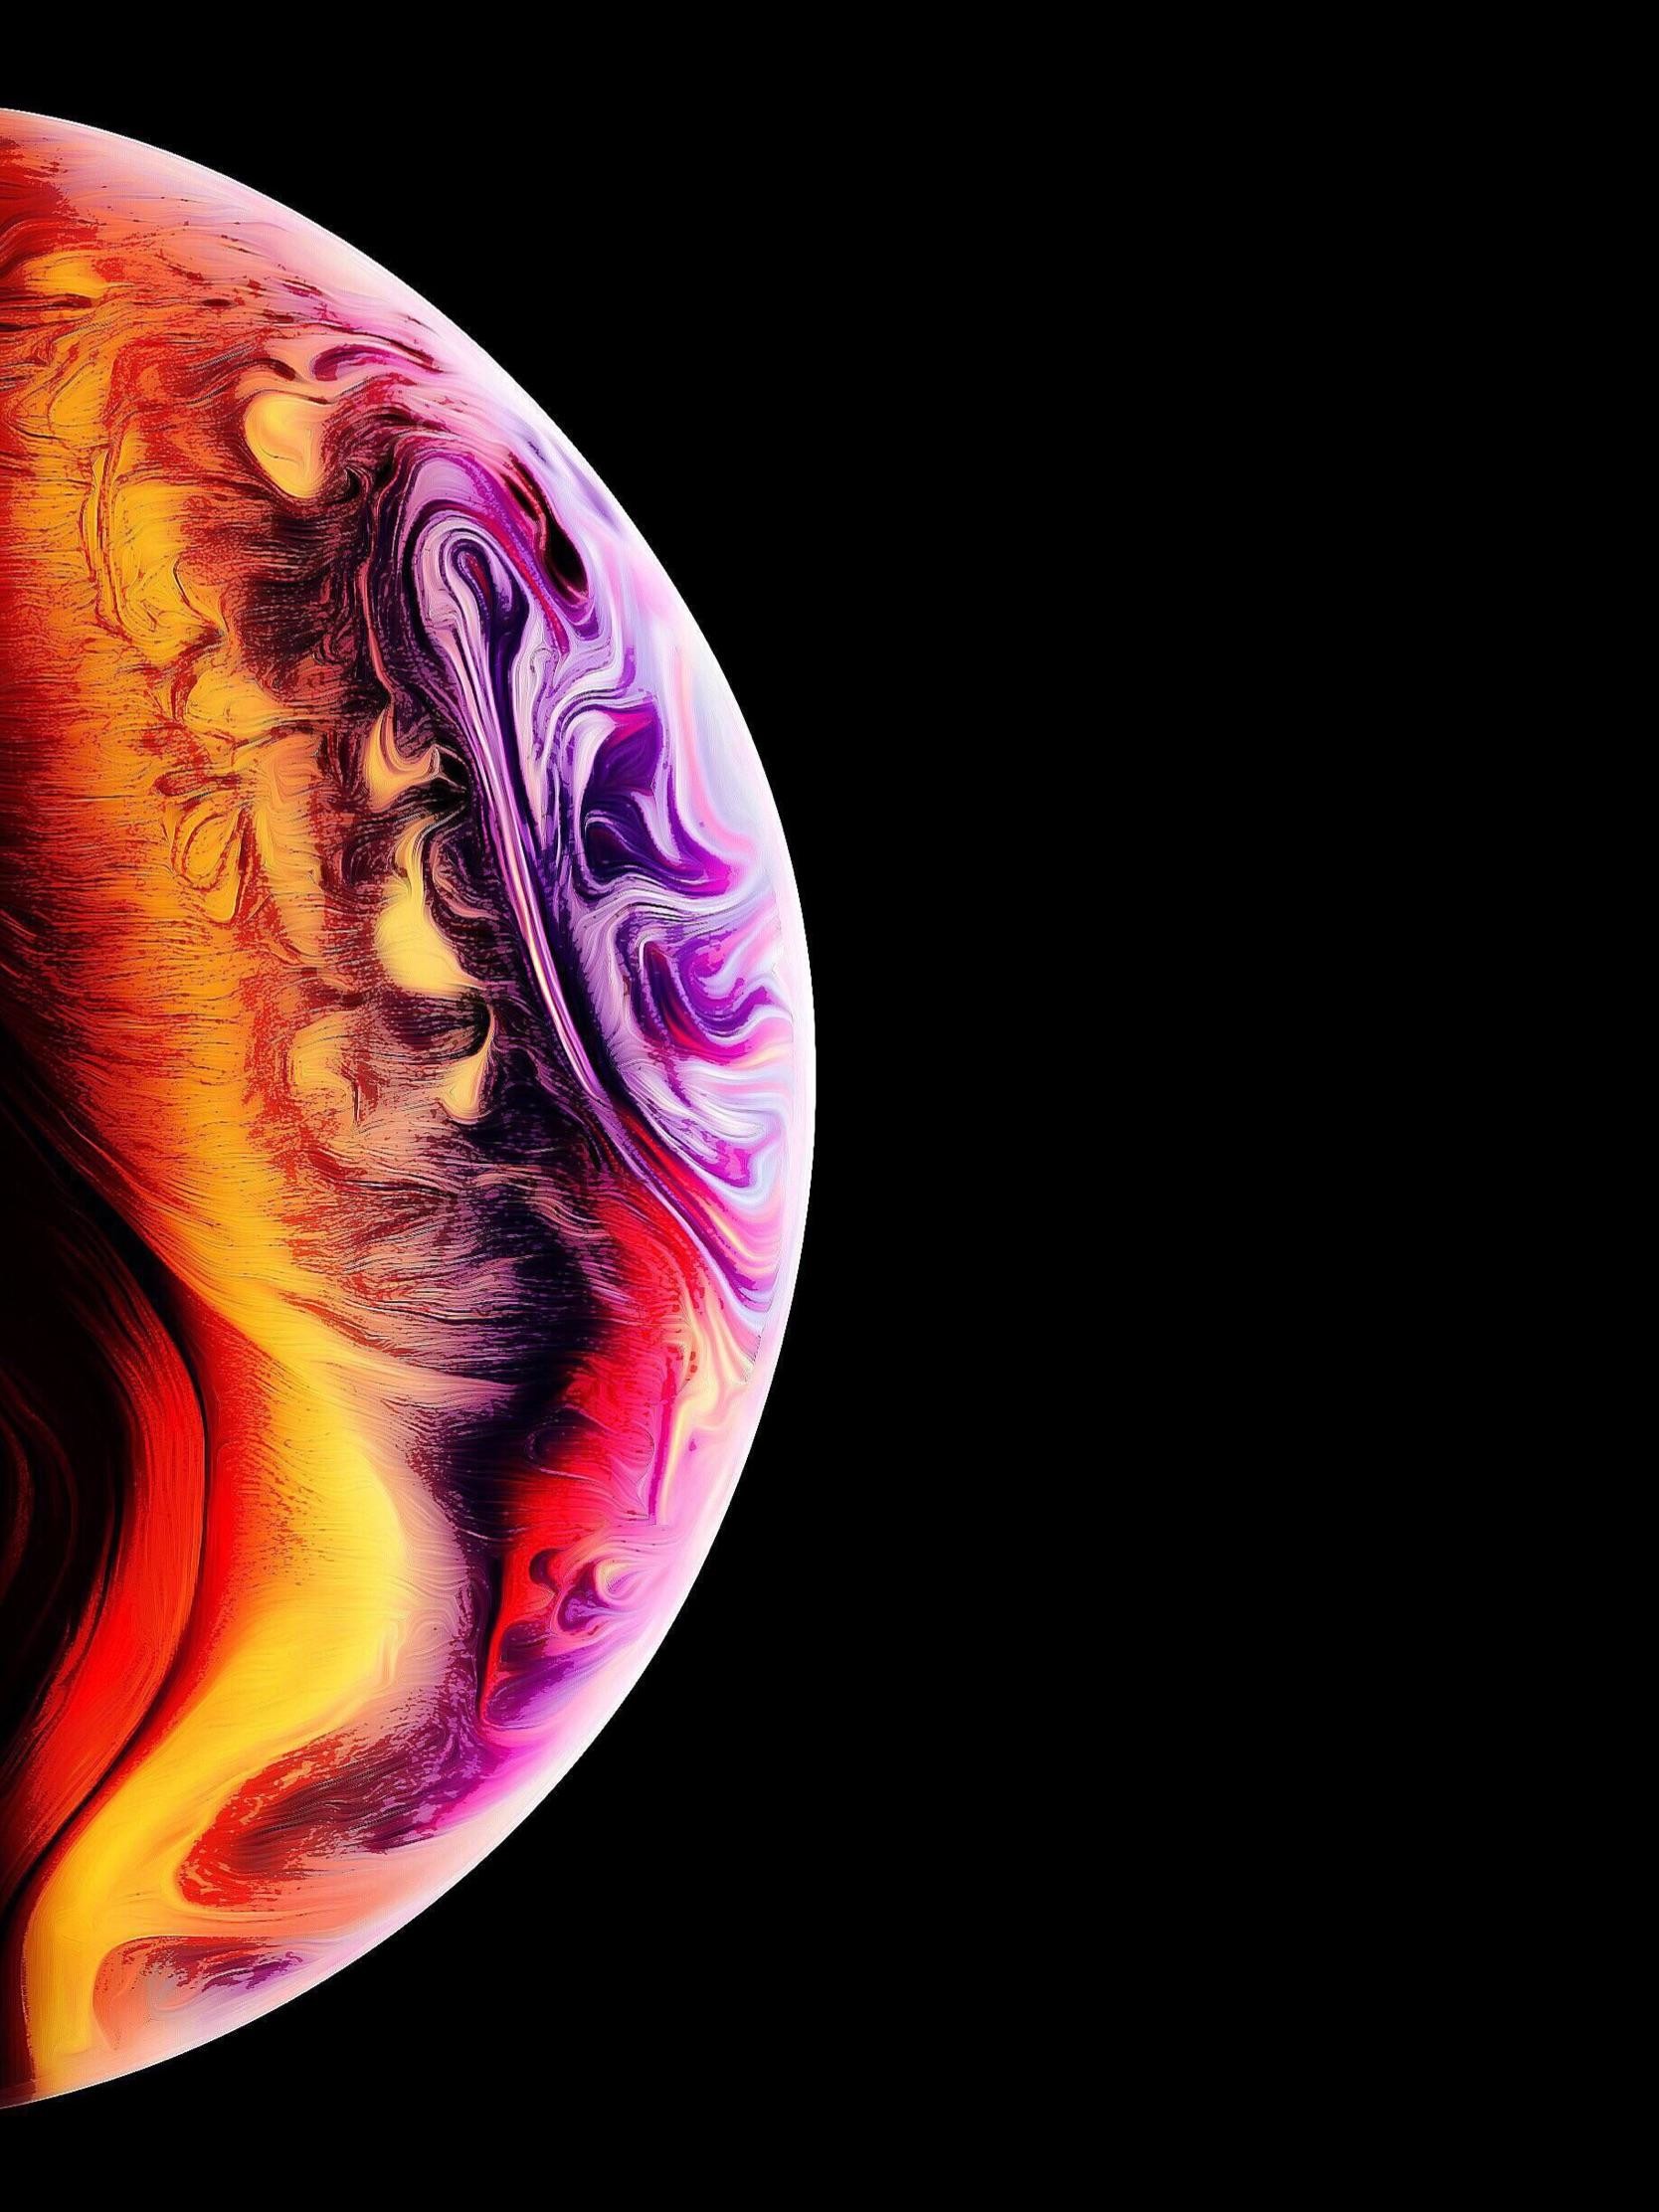 1668x2224 Leaked iPhone Xs Wallpaper For iPad Pro 10.5 ...